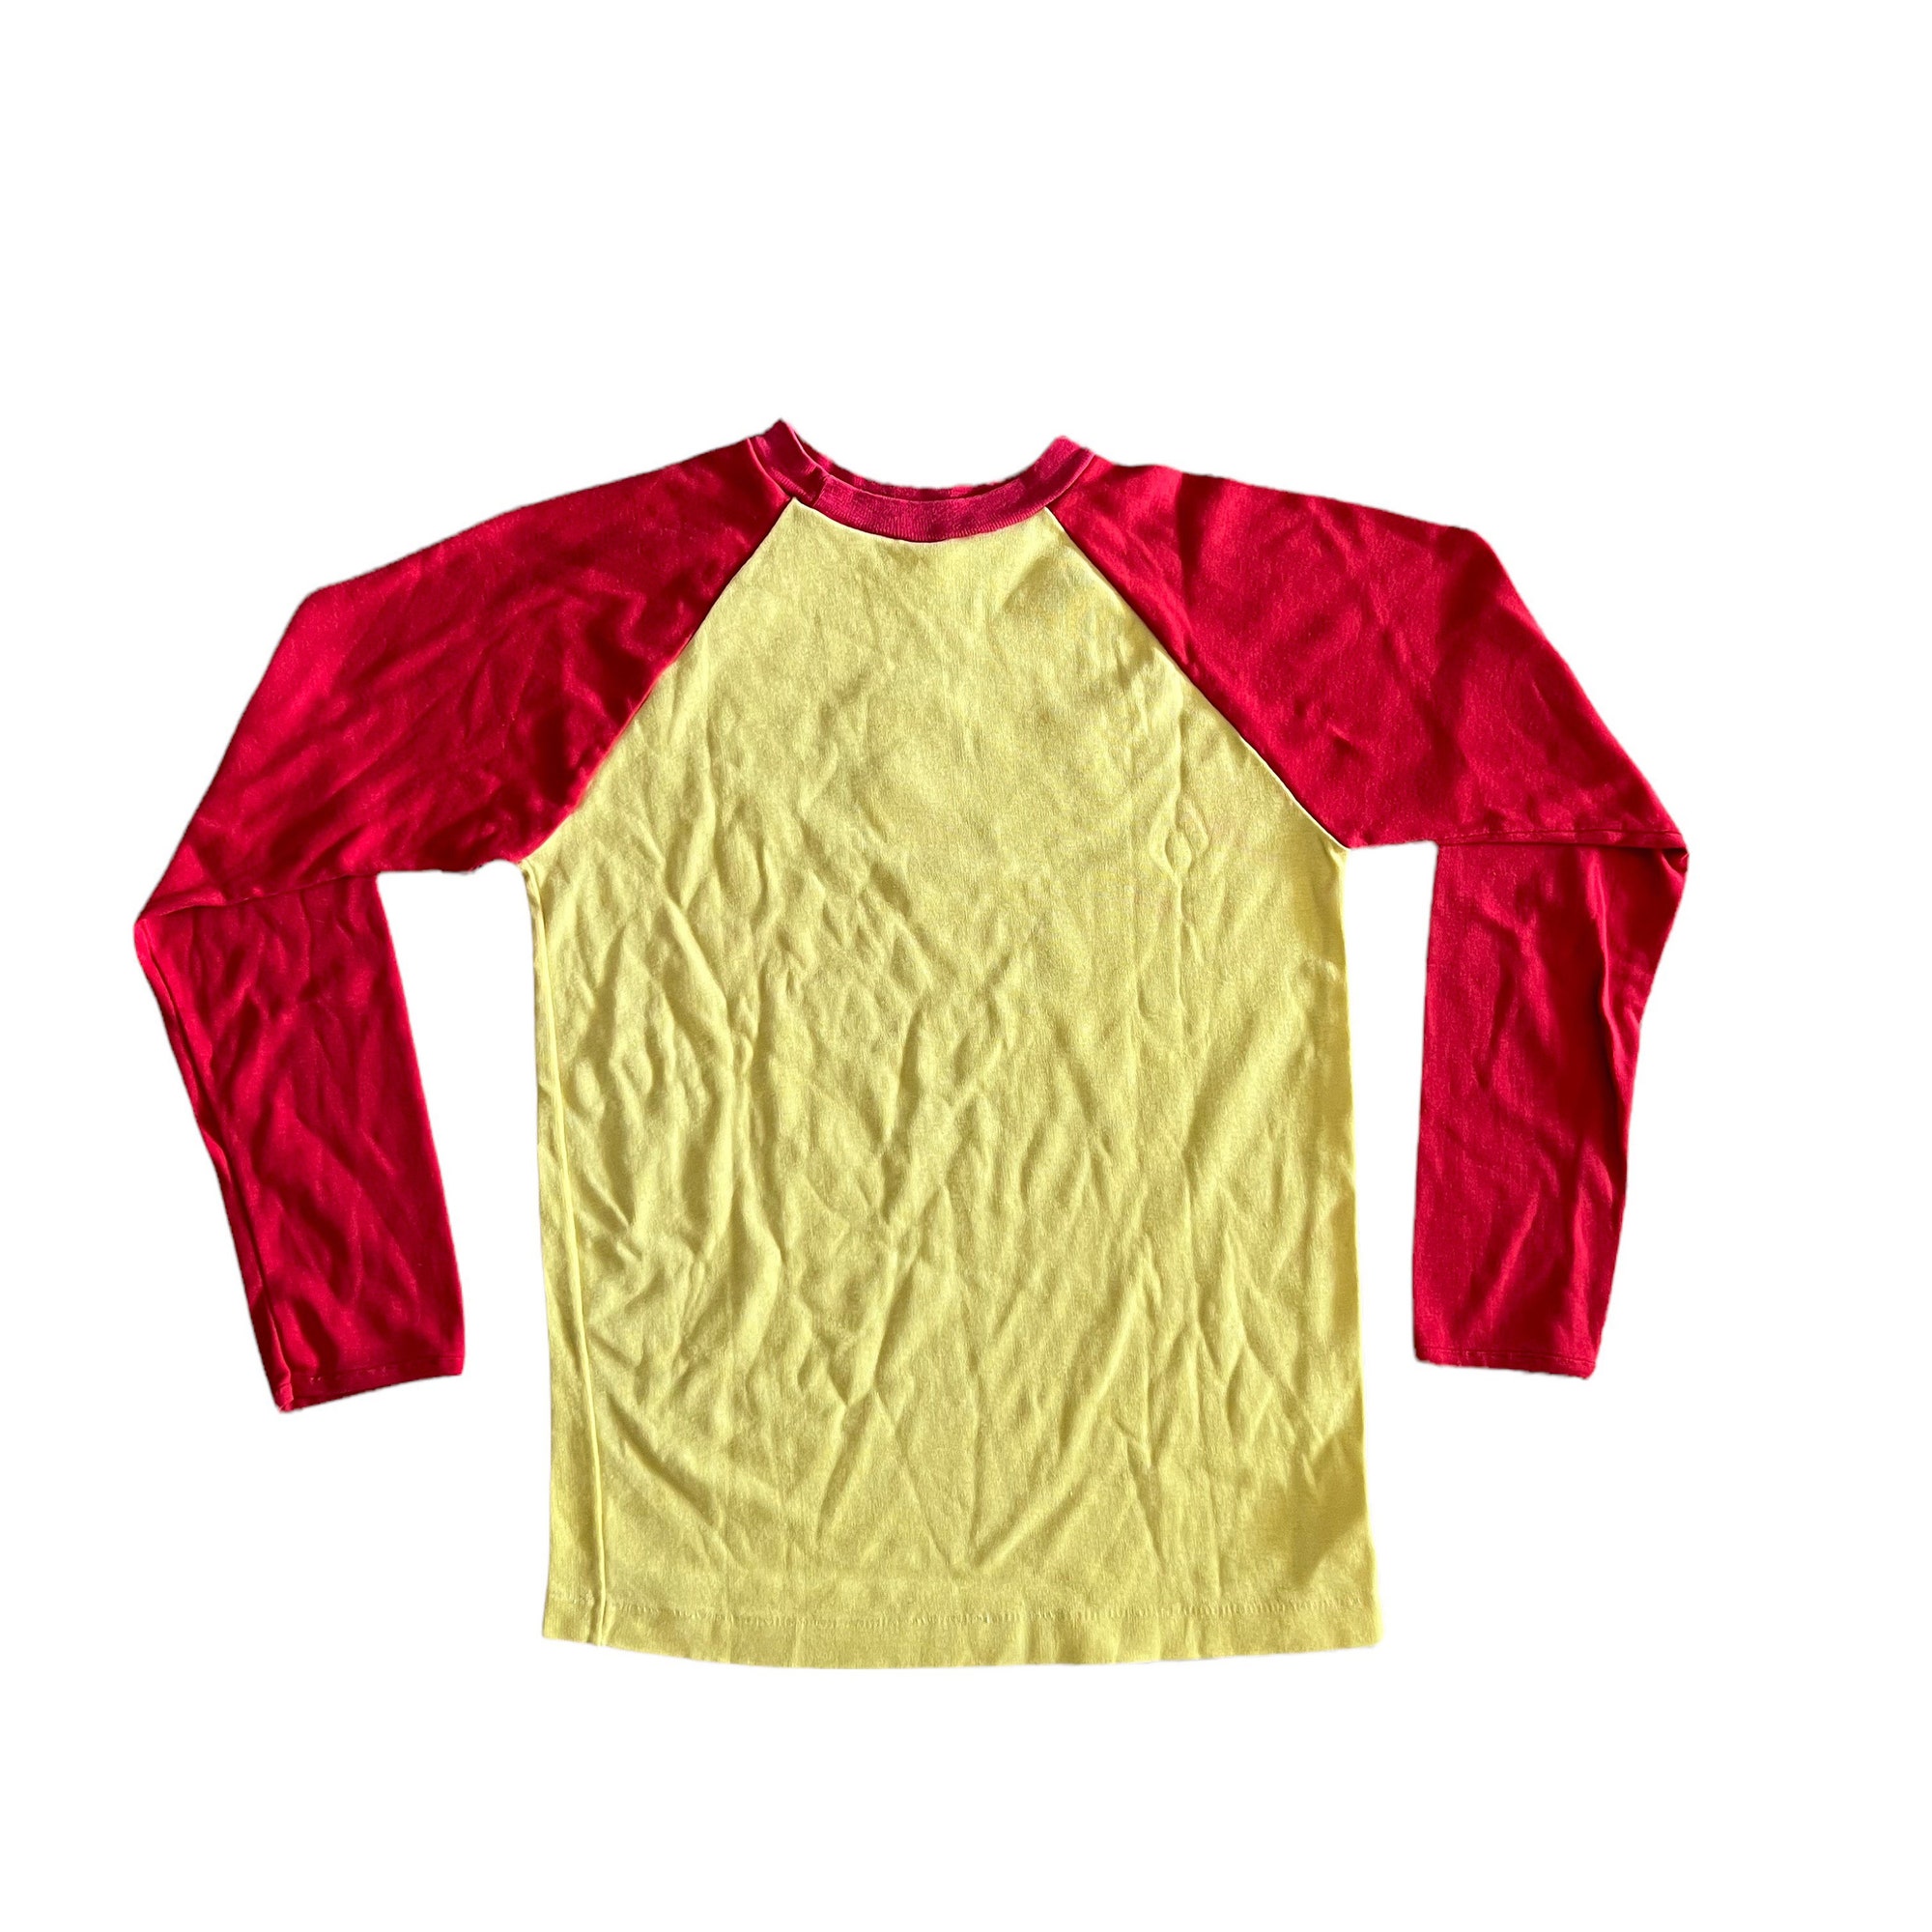 Vintage 70s Mighty Mouse Baseball Tee